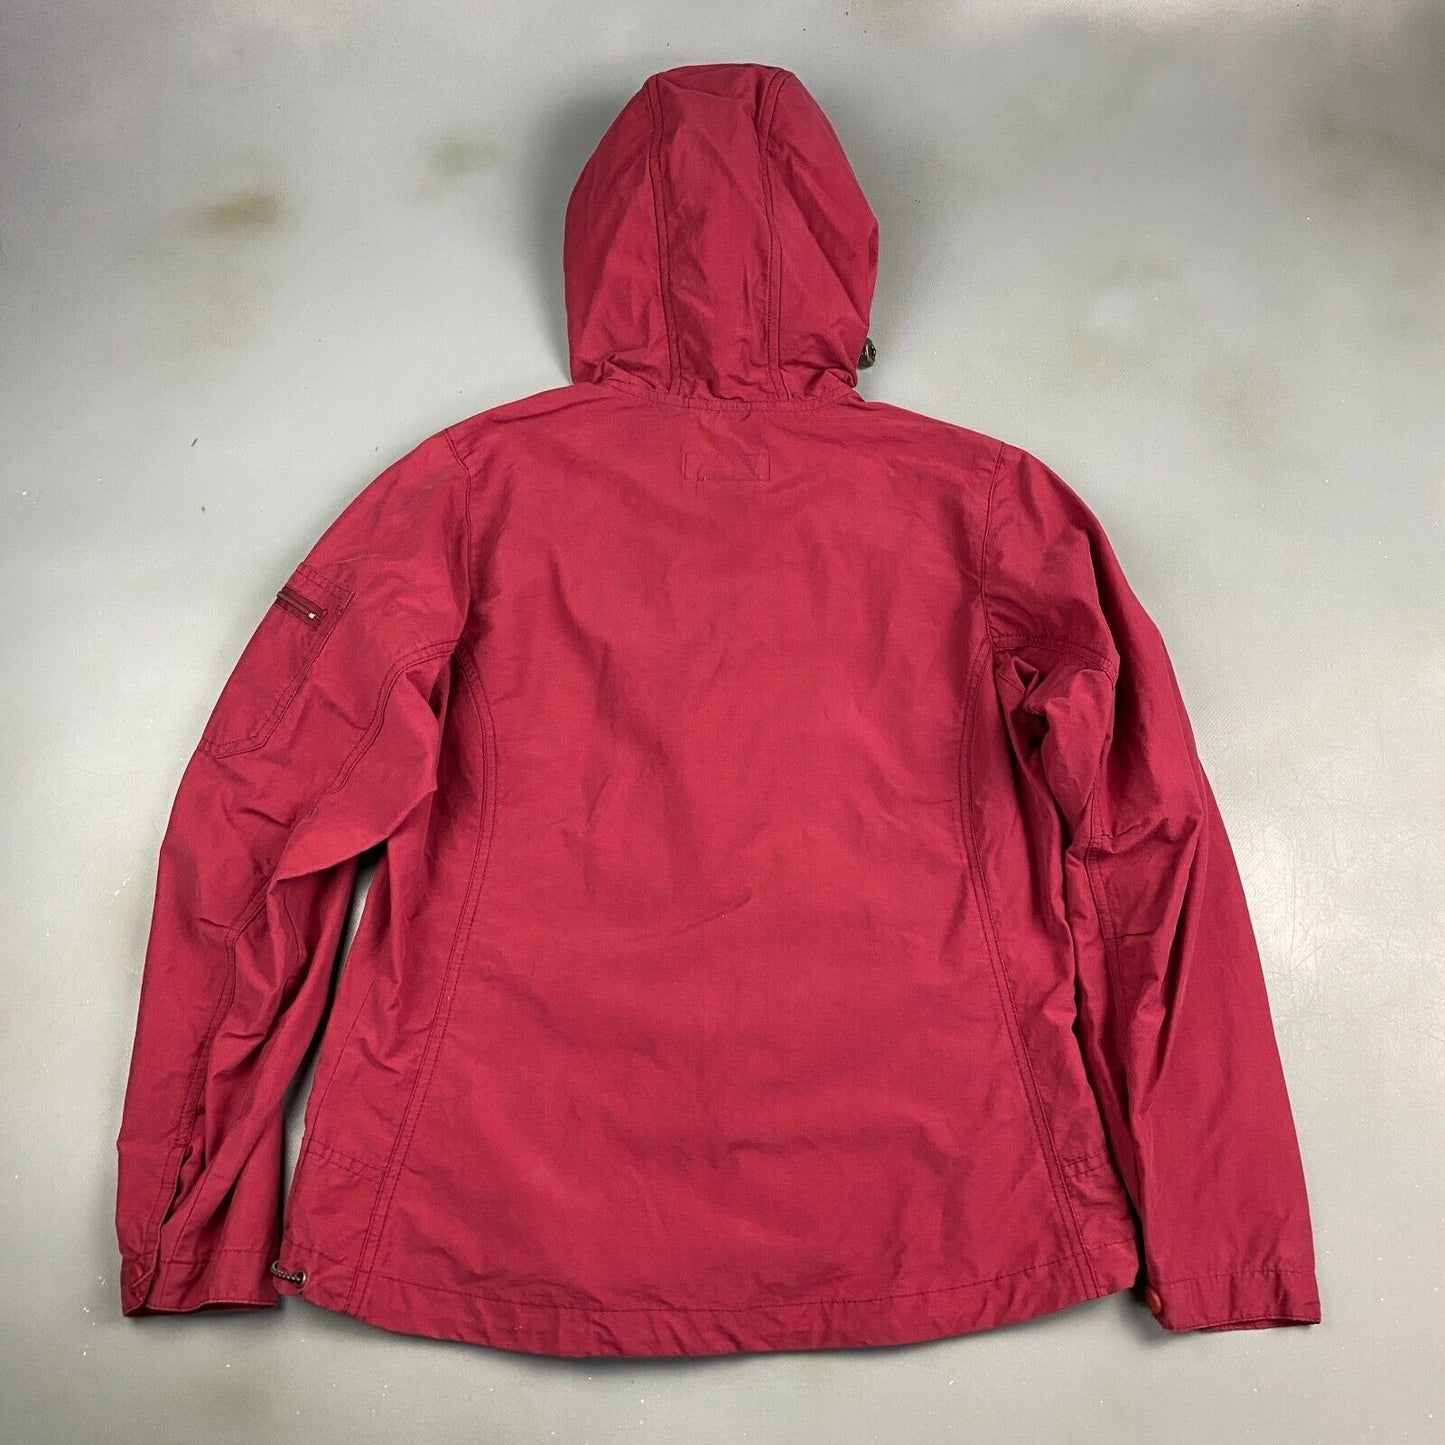 VINTAGE 90s Columbia Red Cotton Blend Tech Windbreaker Jacket sz Small Adult